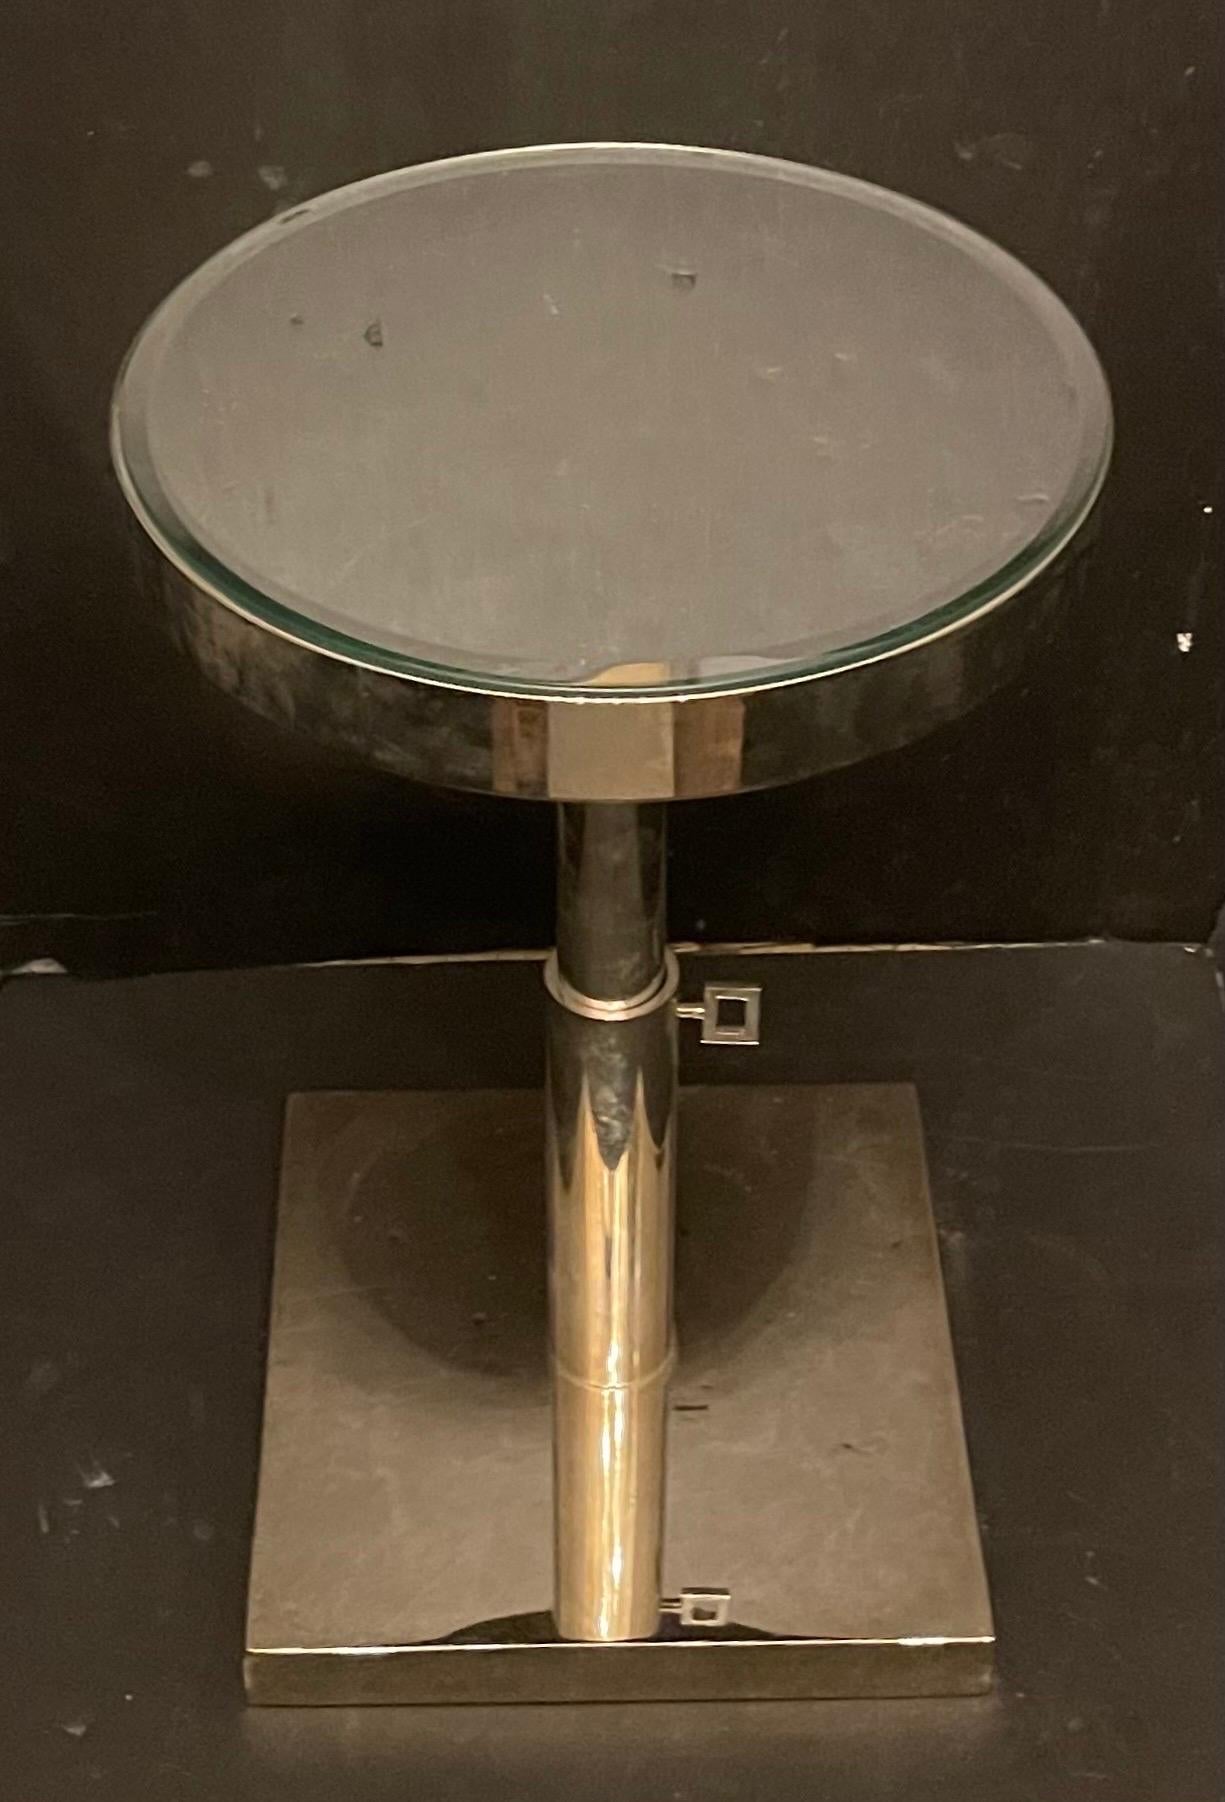 A wonderful Lorin Marsh polished nickel / chrome round mirrored top telescoping side table
Top is 12 1/4